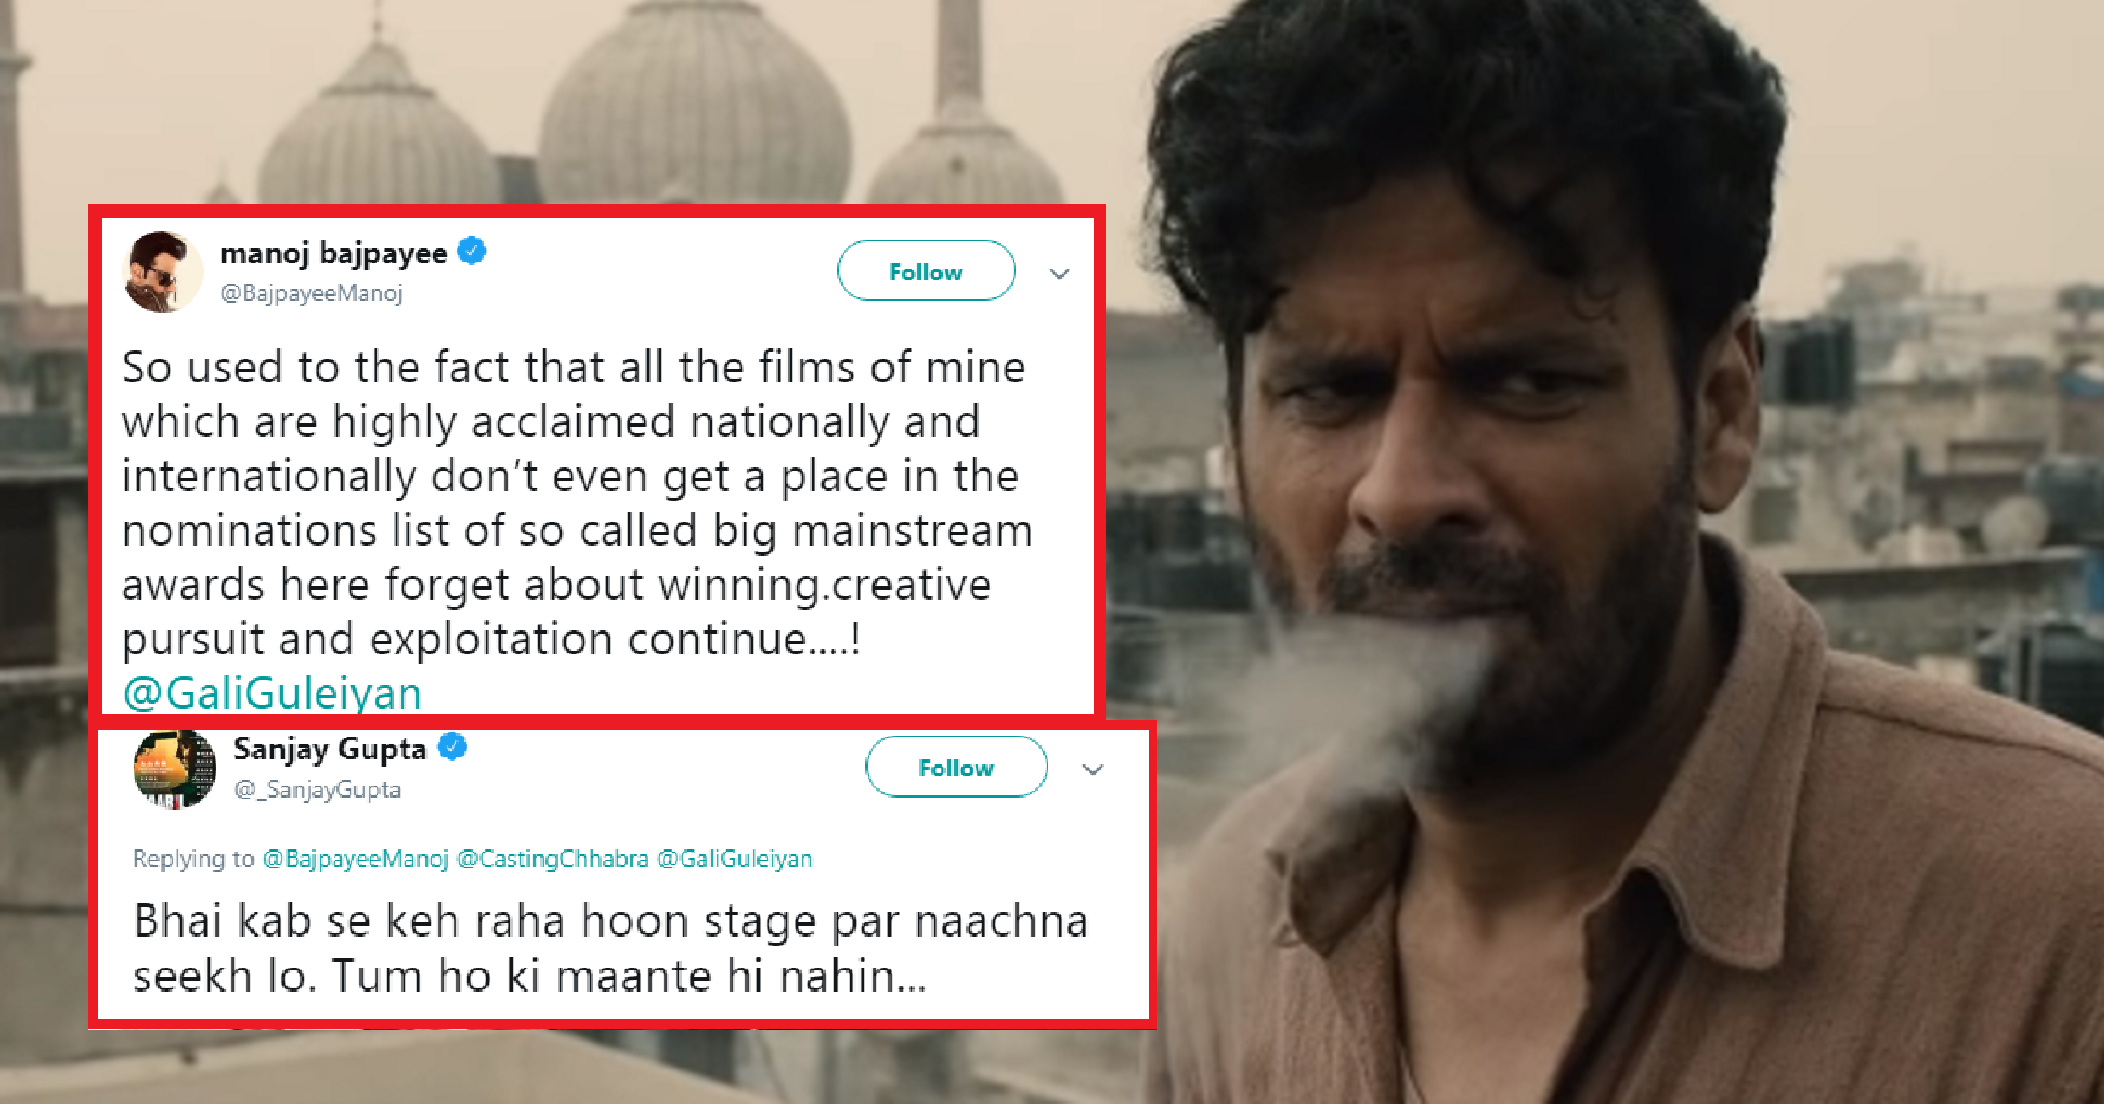 Manoj Bajpayee Complains of Prejudice, Neglect and ‘Exploitation’ in Indian Film Awards